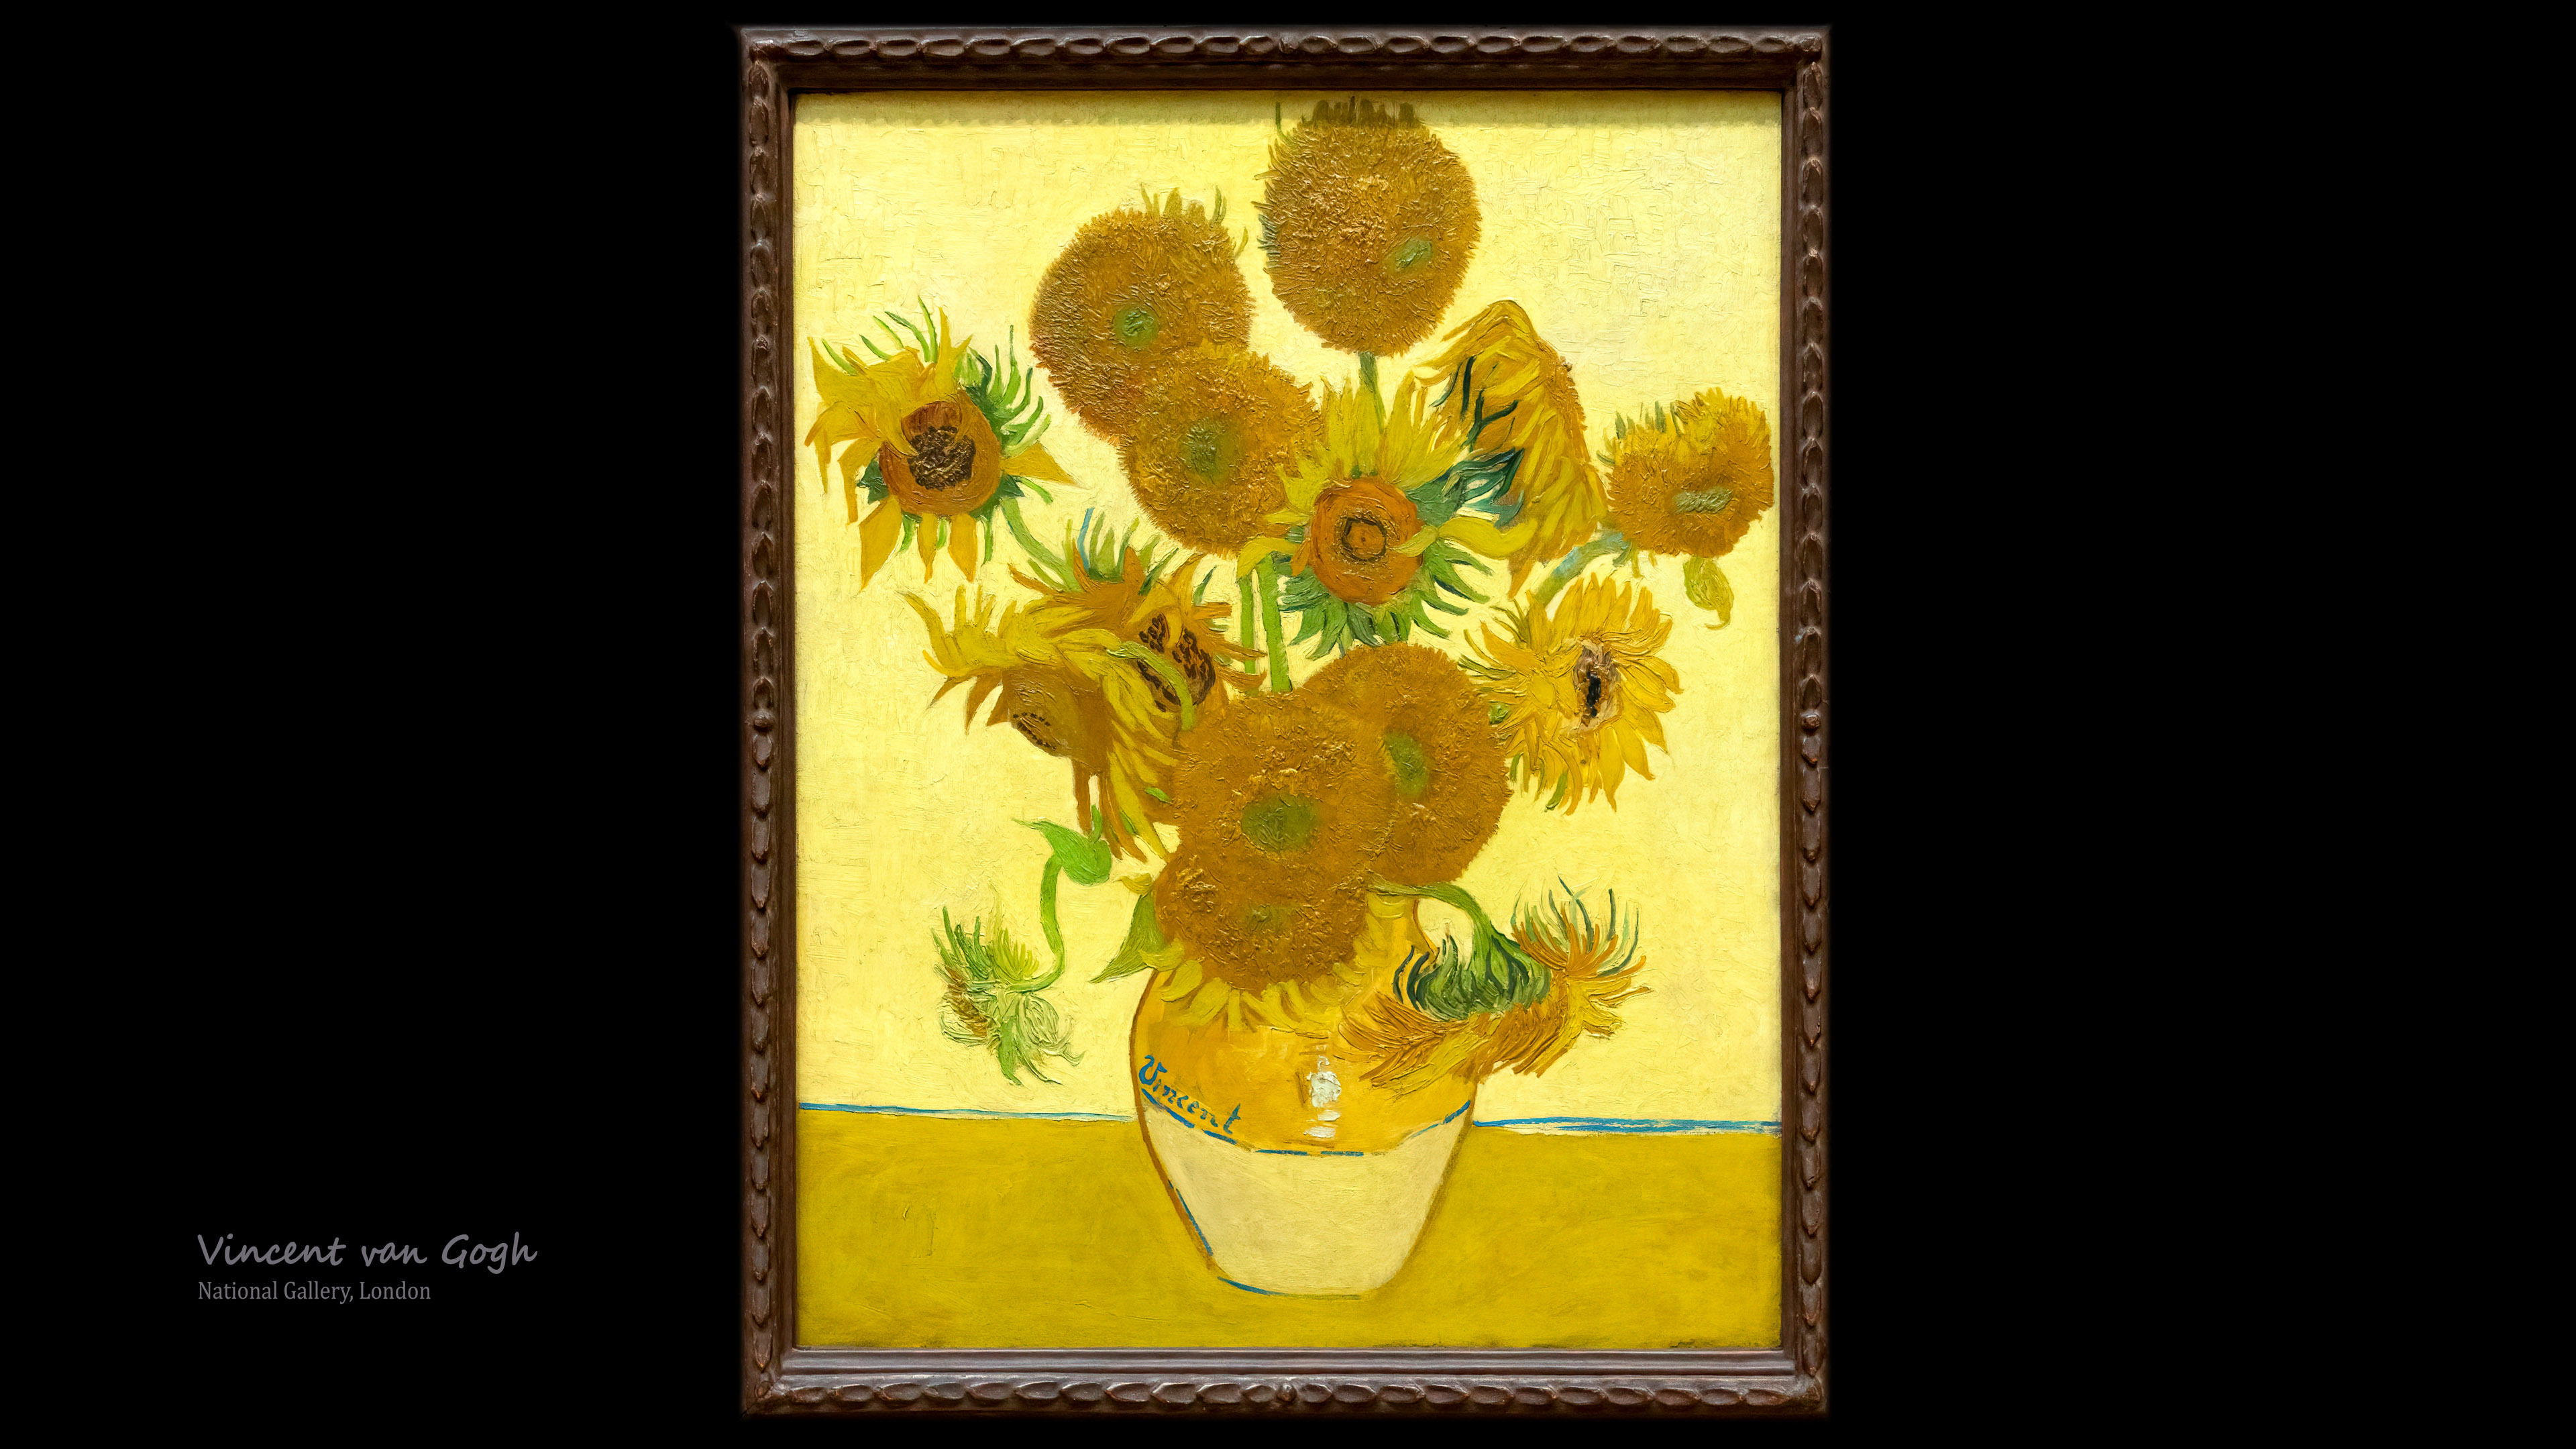 Vase with Fifteen Sunflowers painting wallpaper in 4K graces your devices, infusing vibrant energy into your iPhones with Van Gogh's iconic masterpiece.